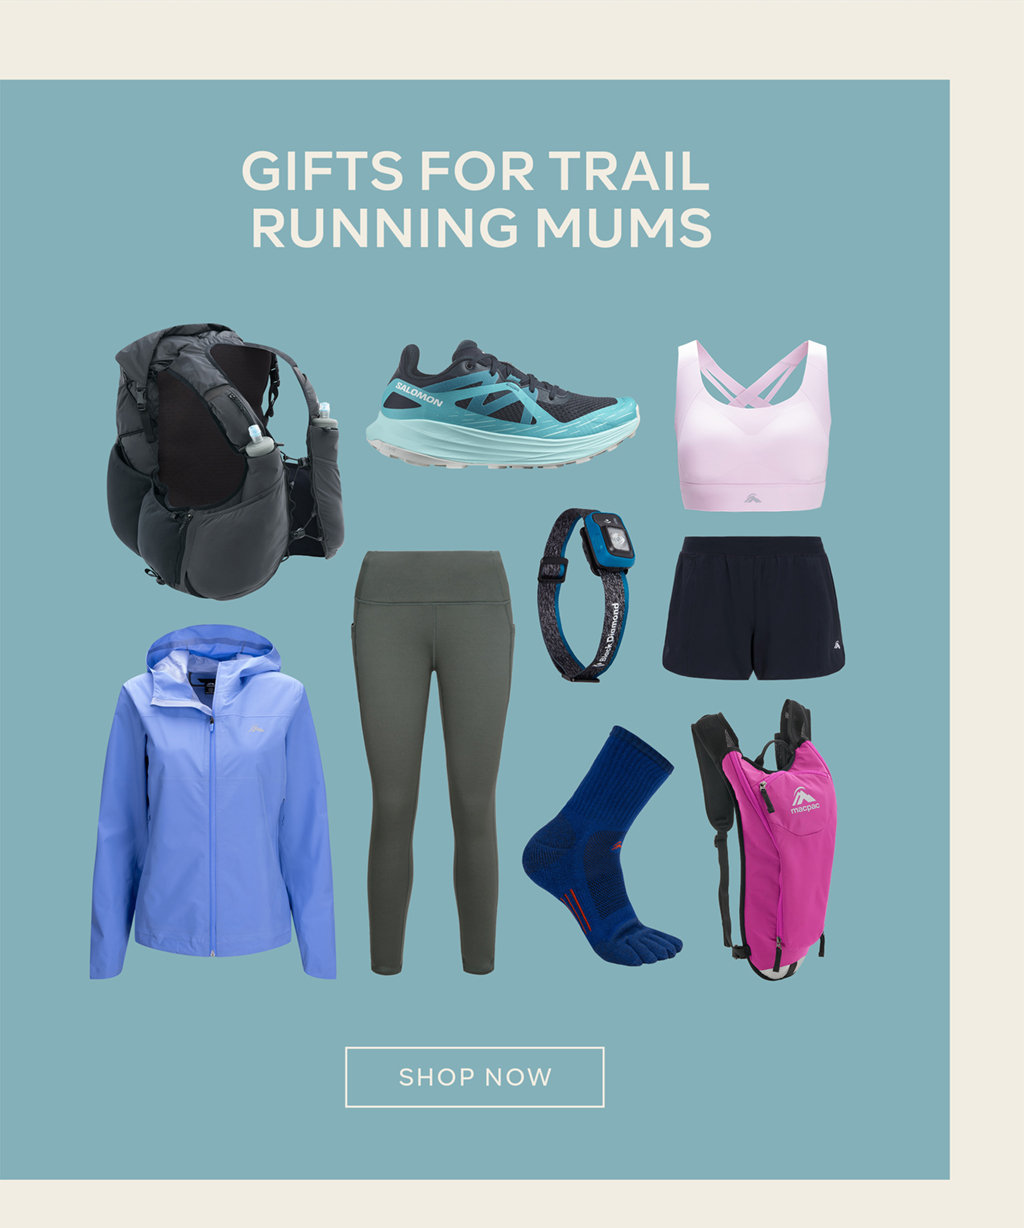 GIFTS FOR TRAIL RUNNING MUMS